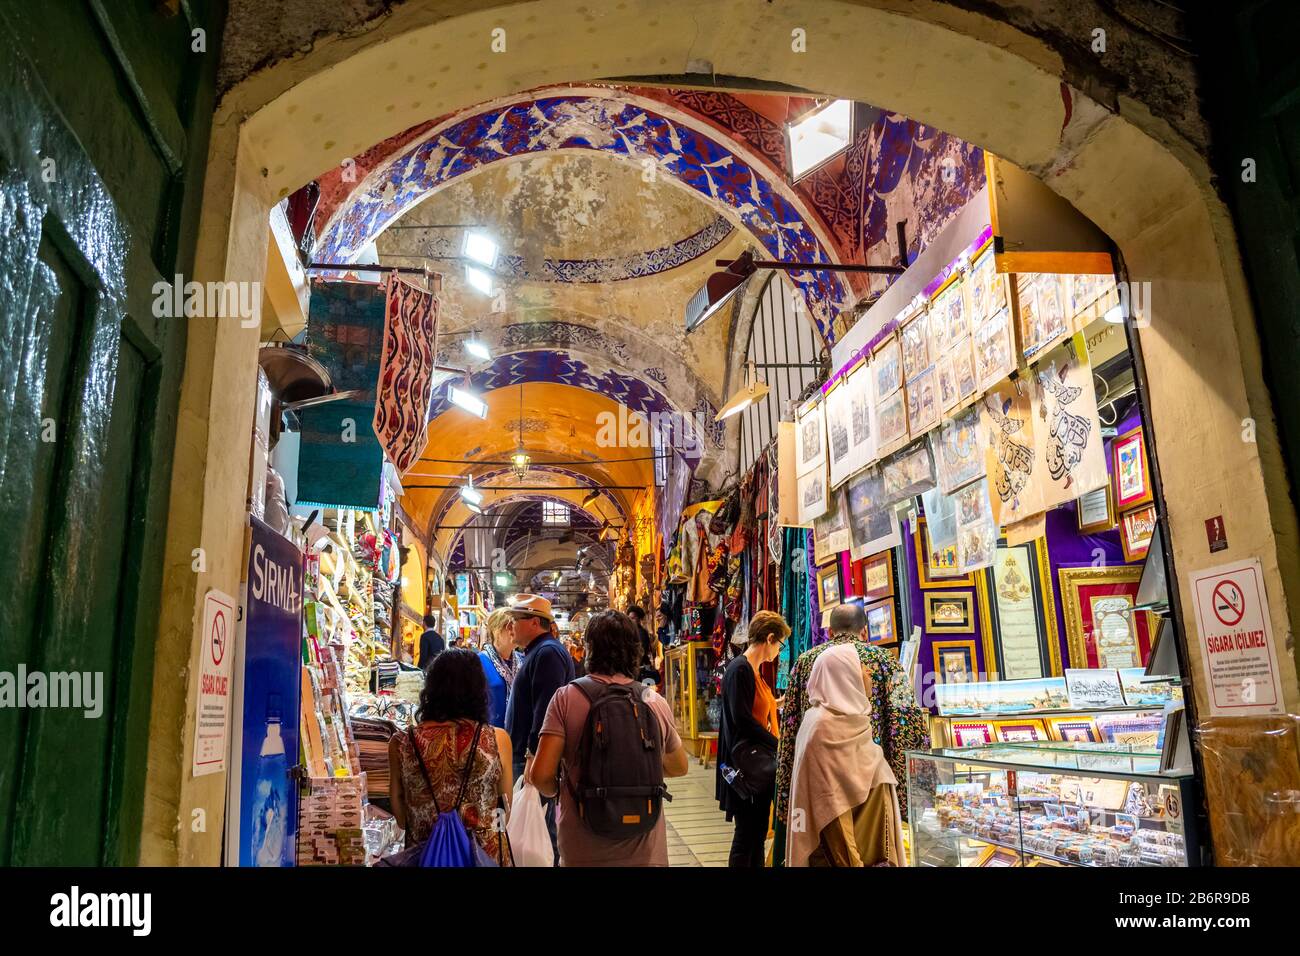 Tourists shop the souvenirs, textiles and gifts in the colorful, historic indoor Grand Bazaar in Istanbul. Stock Photo